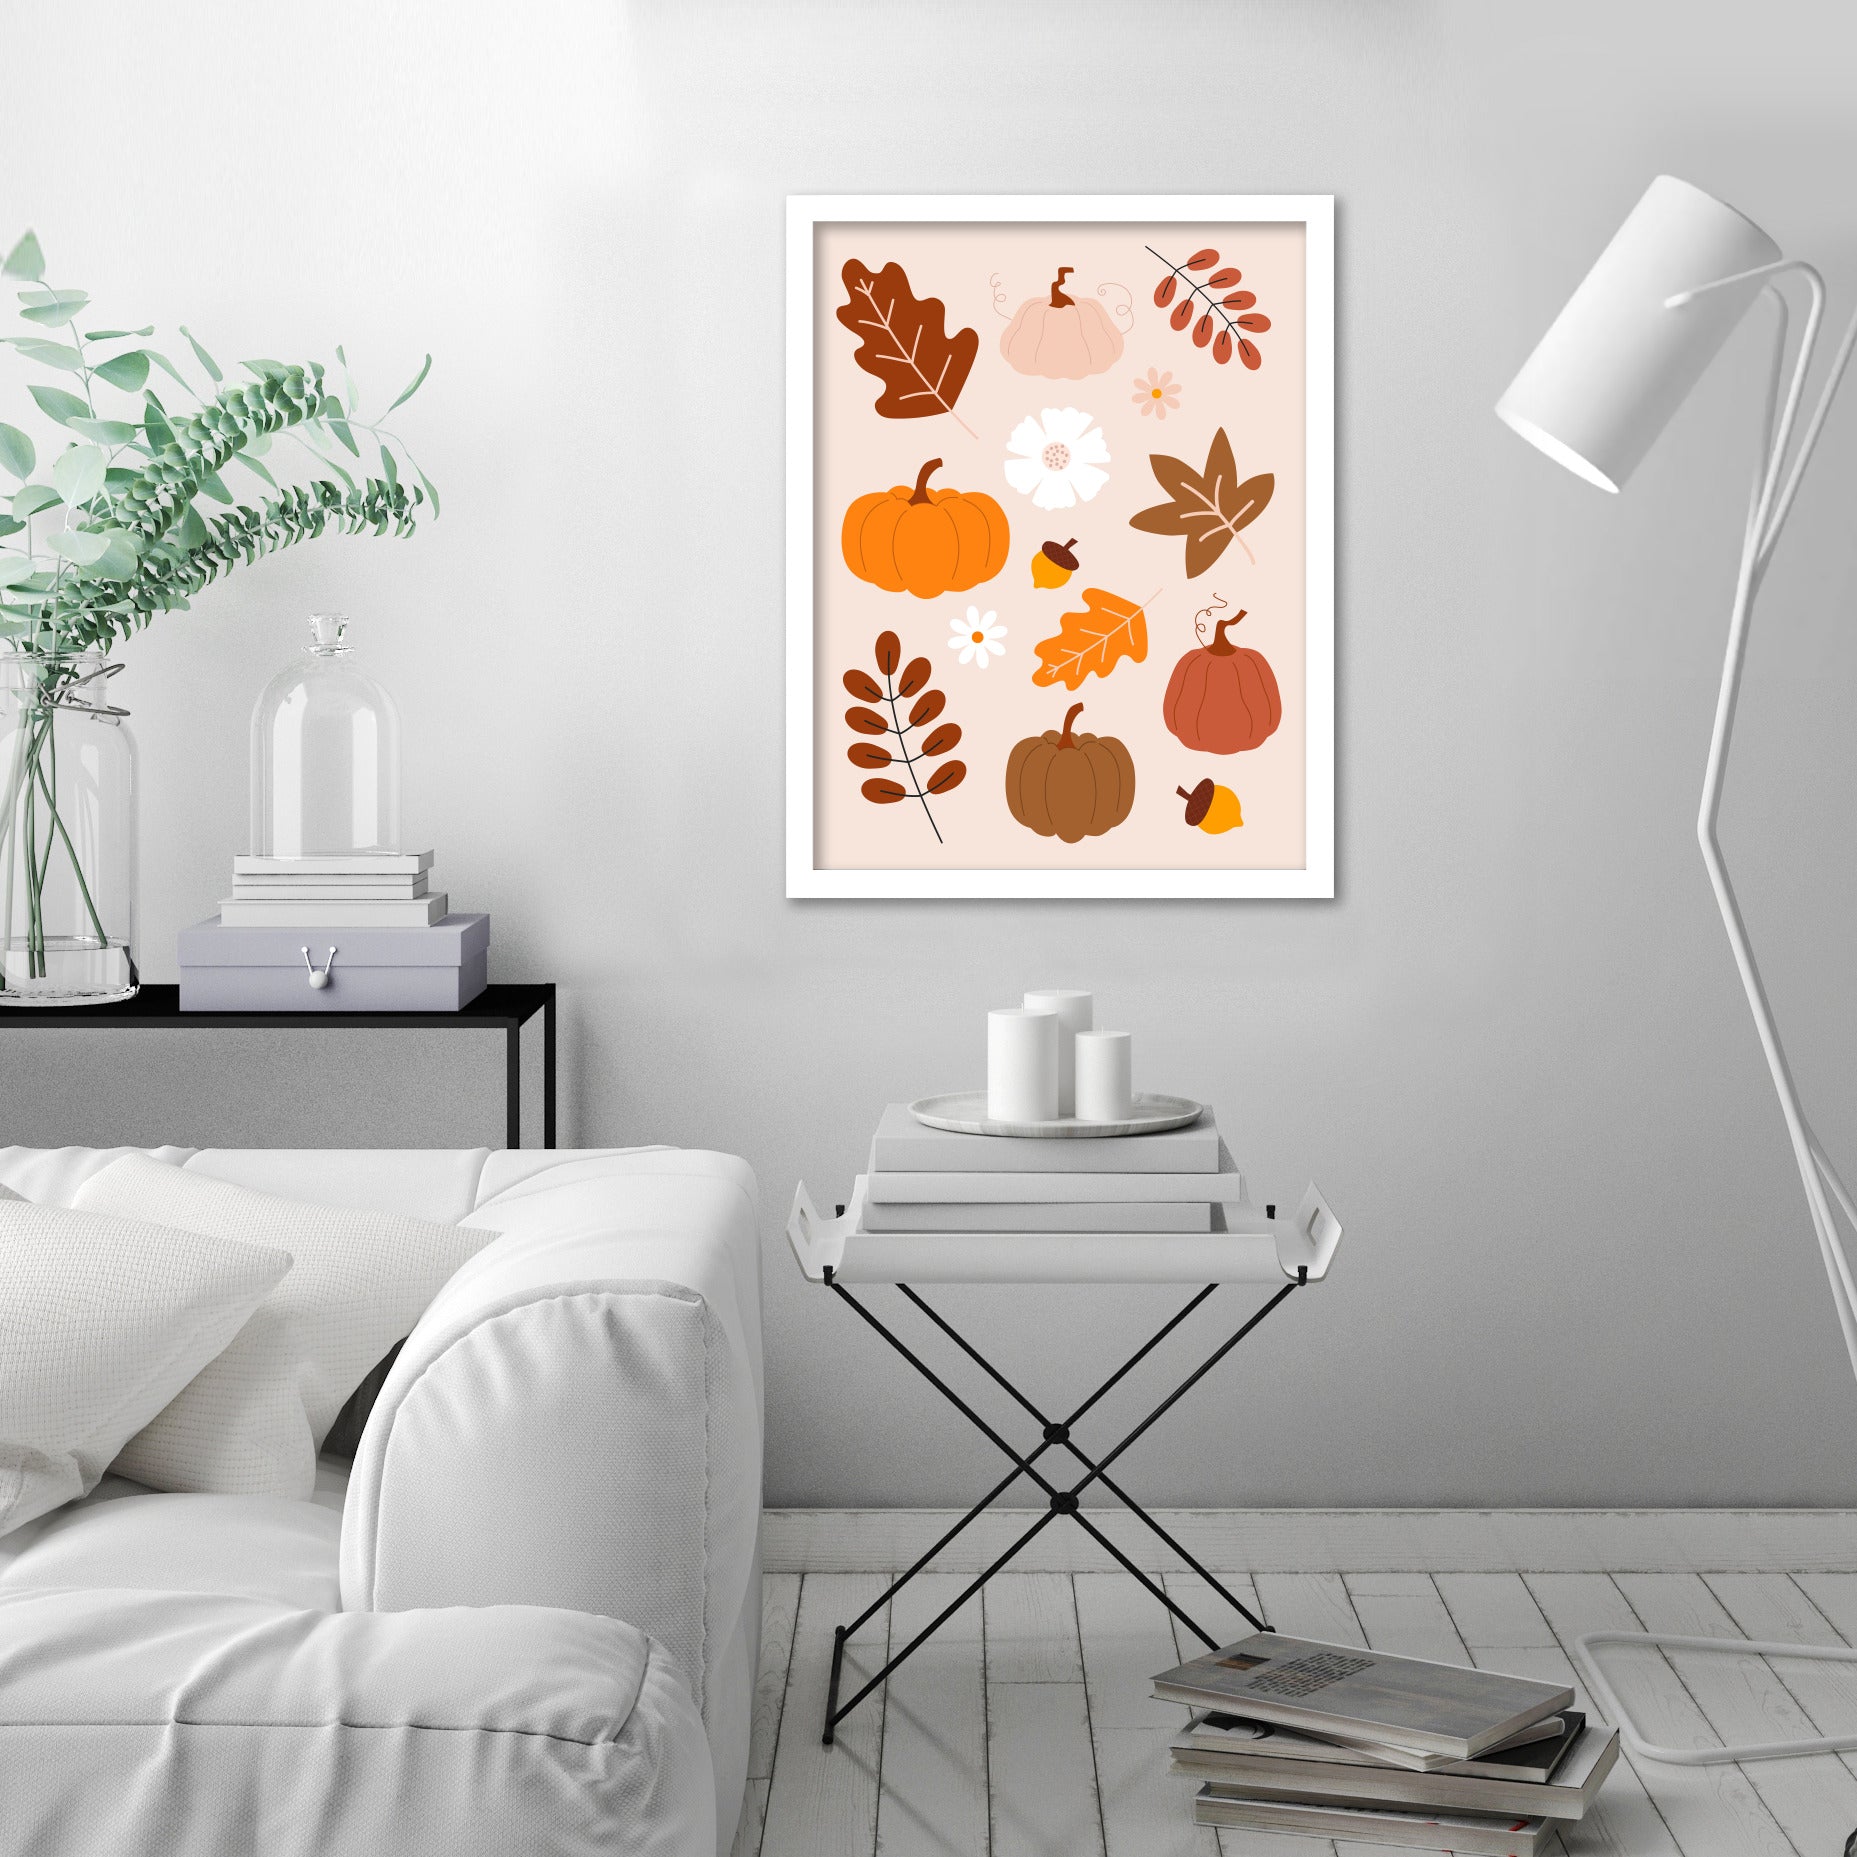 Autumn Vibes by Artprink - Canvas, Poster or Framed Print